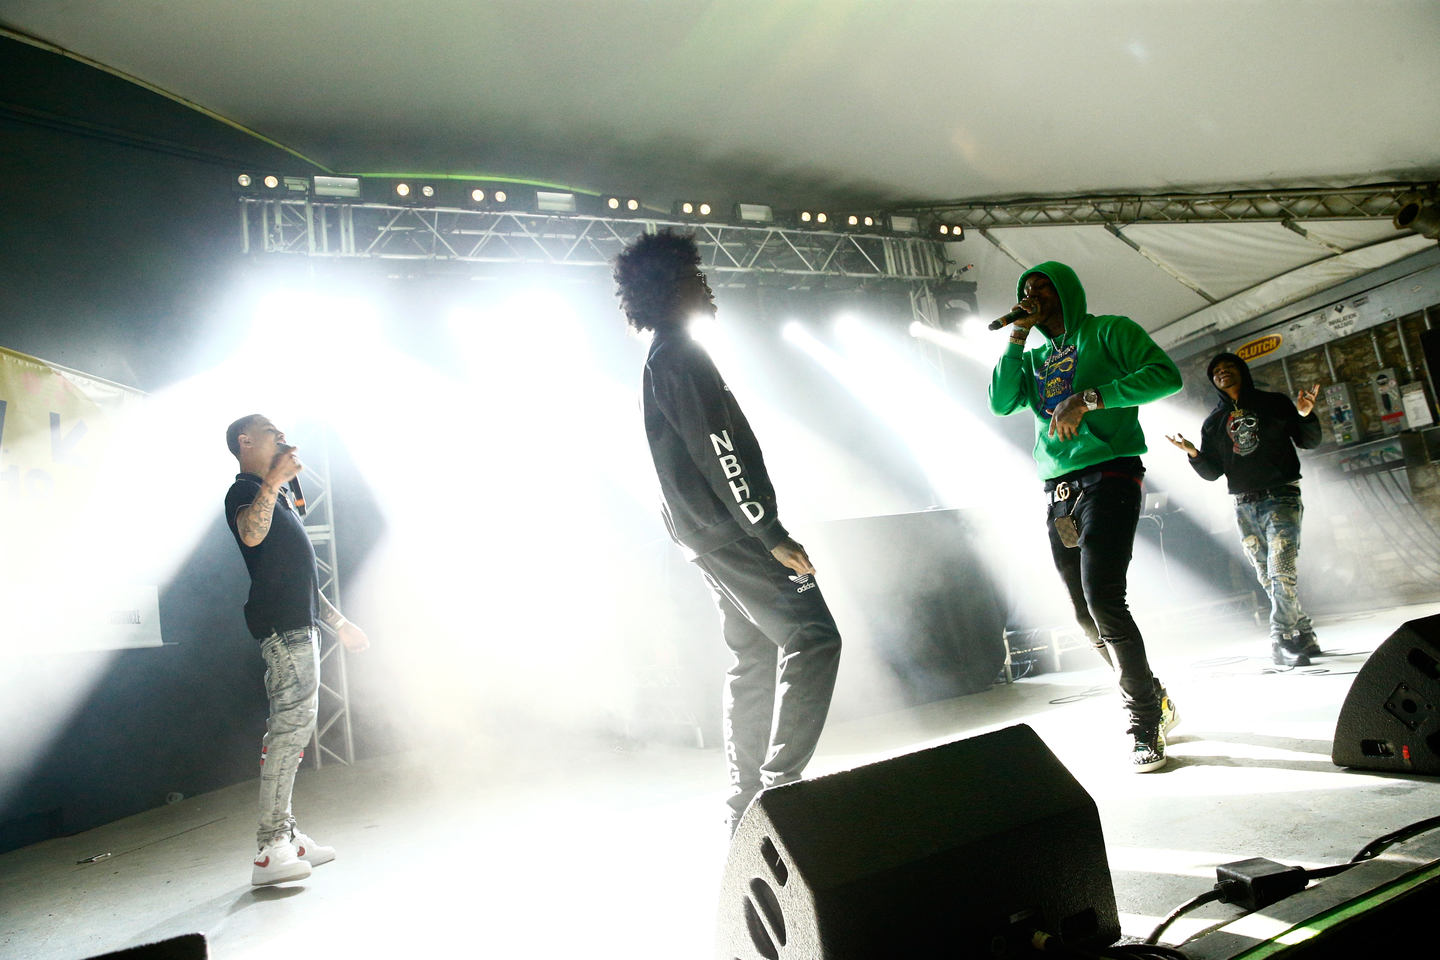 SOB x RBE performed at Stubb's on Thursday night. Photo by Steve Rogers Photography/Getty Images for SXSW